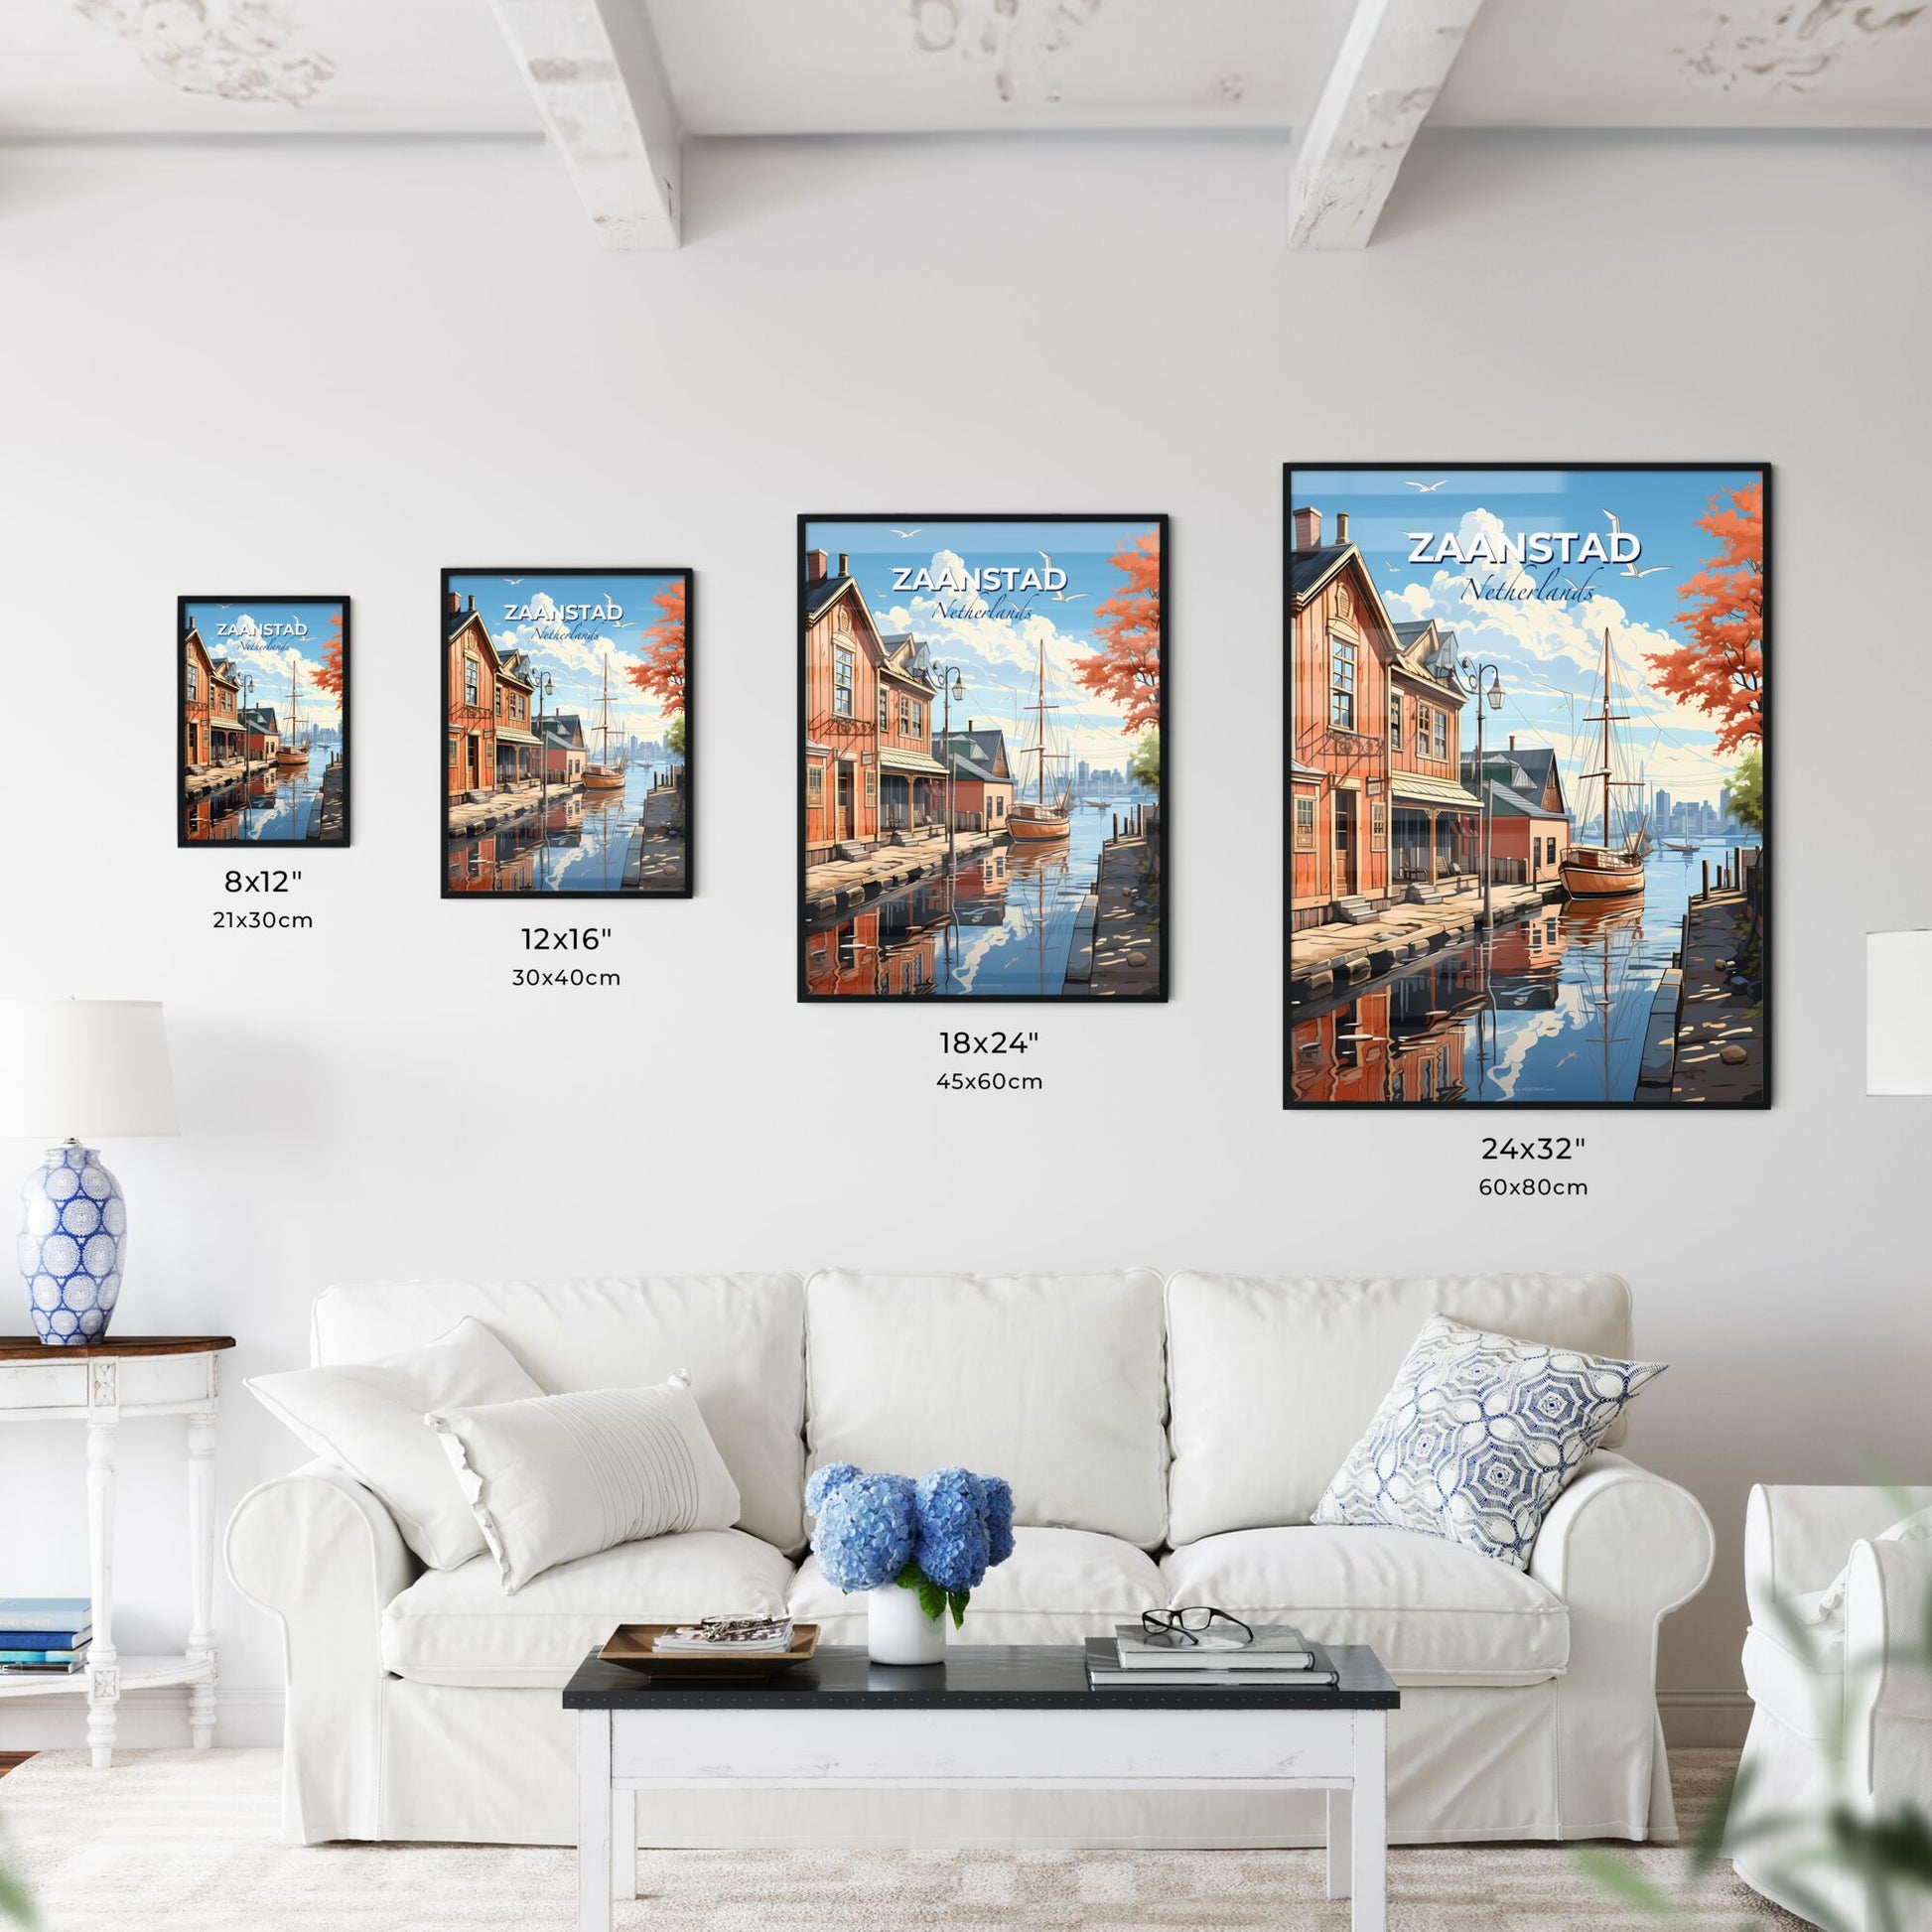 Zaanstad, Netherlands, A Poster of a painting of a canal with buildings and a boat Default Title